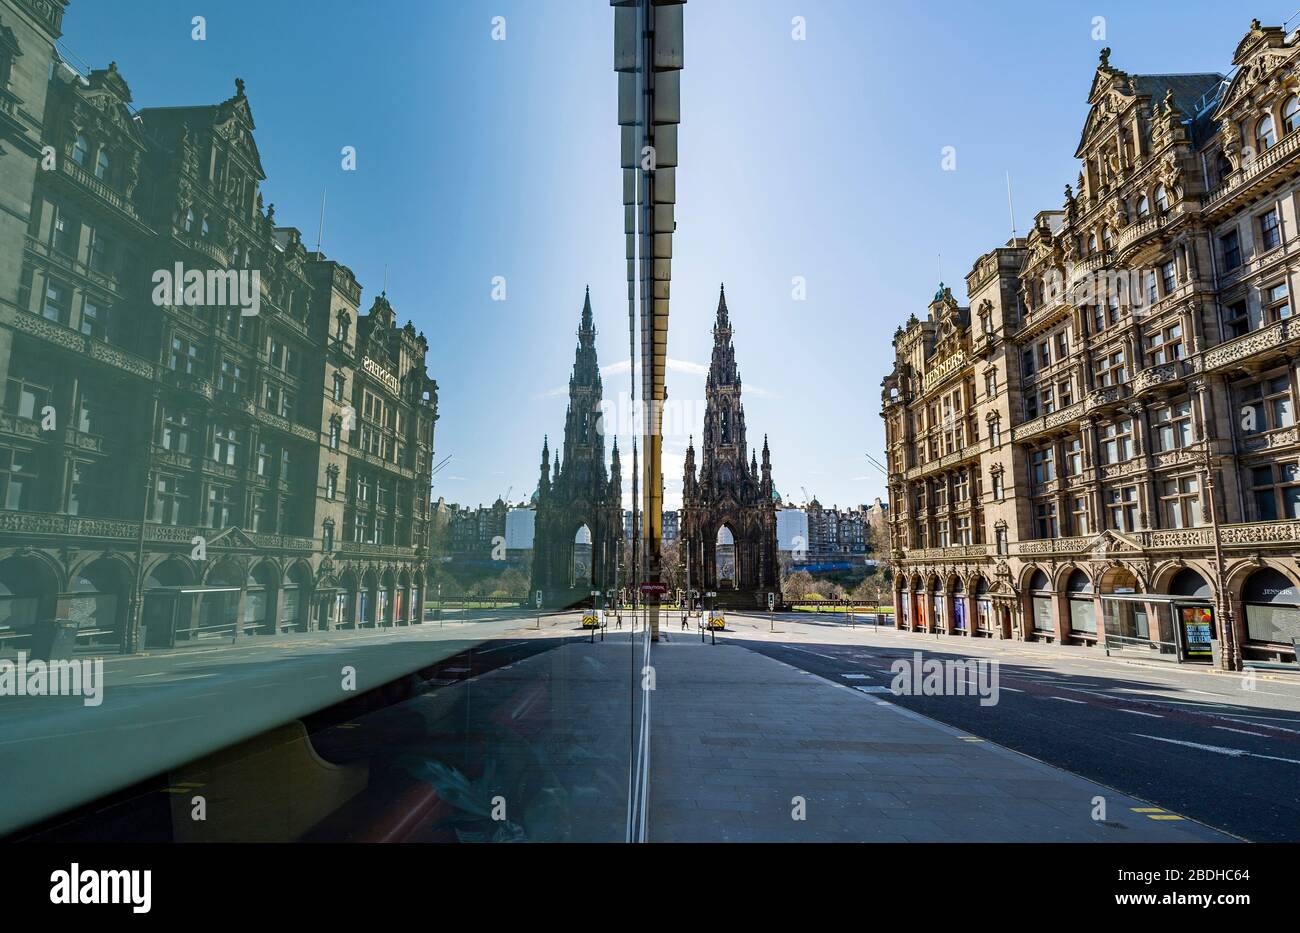 Edinburgh, Scotland, UK. 8 April 2020. Images from Edinburgh during the continuing Coronavirus lockdown. Pictured; View of Scott monument from deserted South St David Street in city centre. Iain Masterton/Alamy Live News. Stock Photo